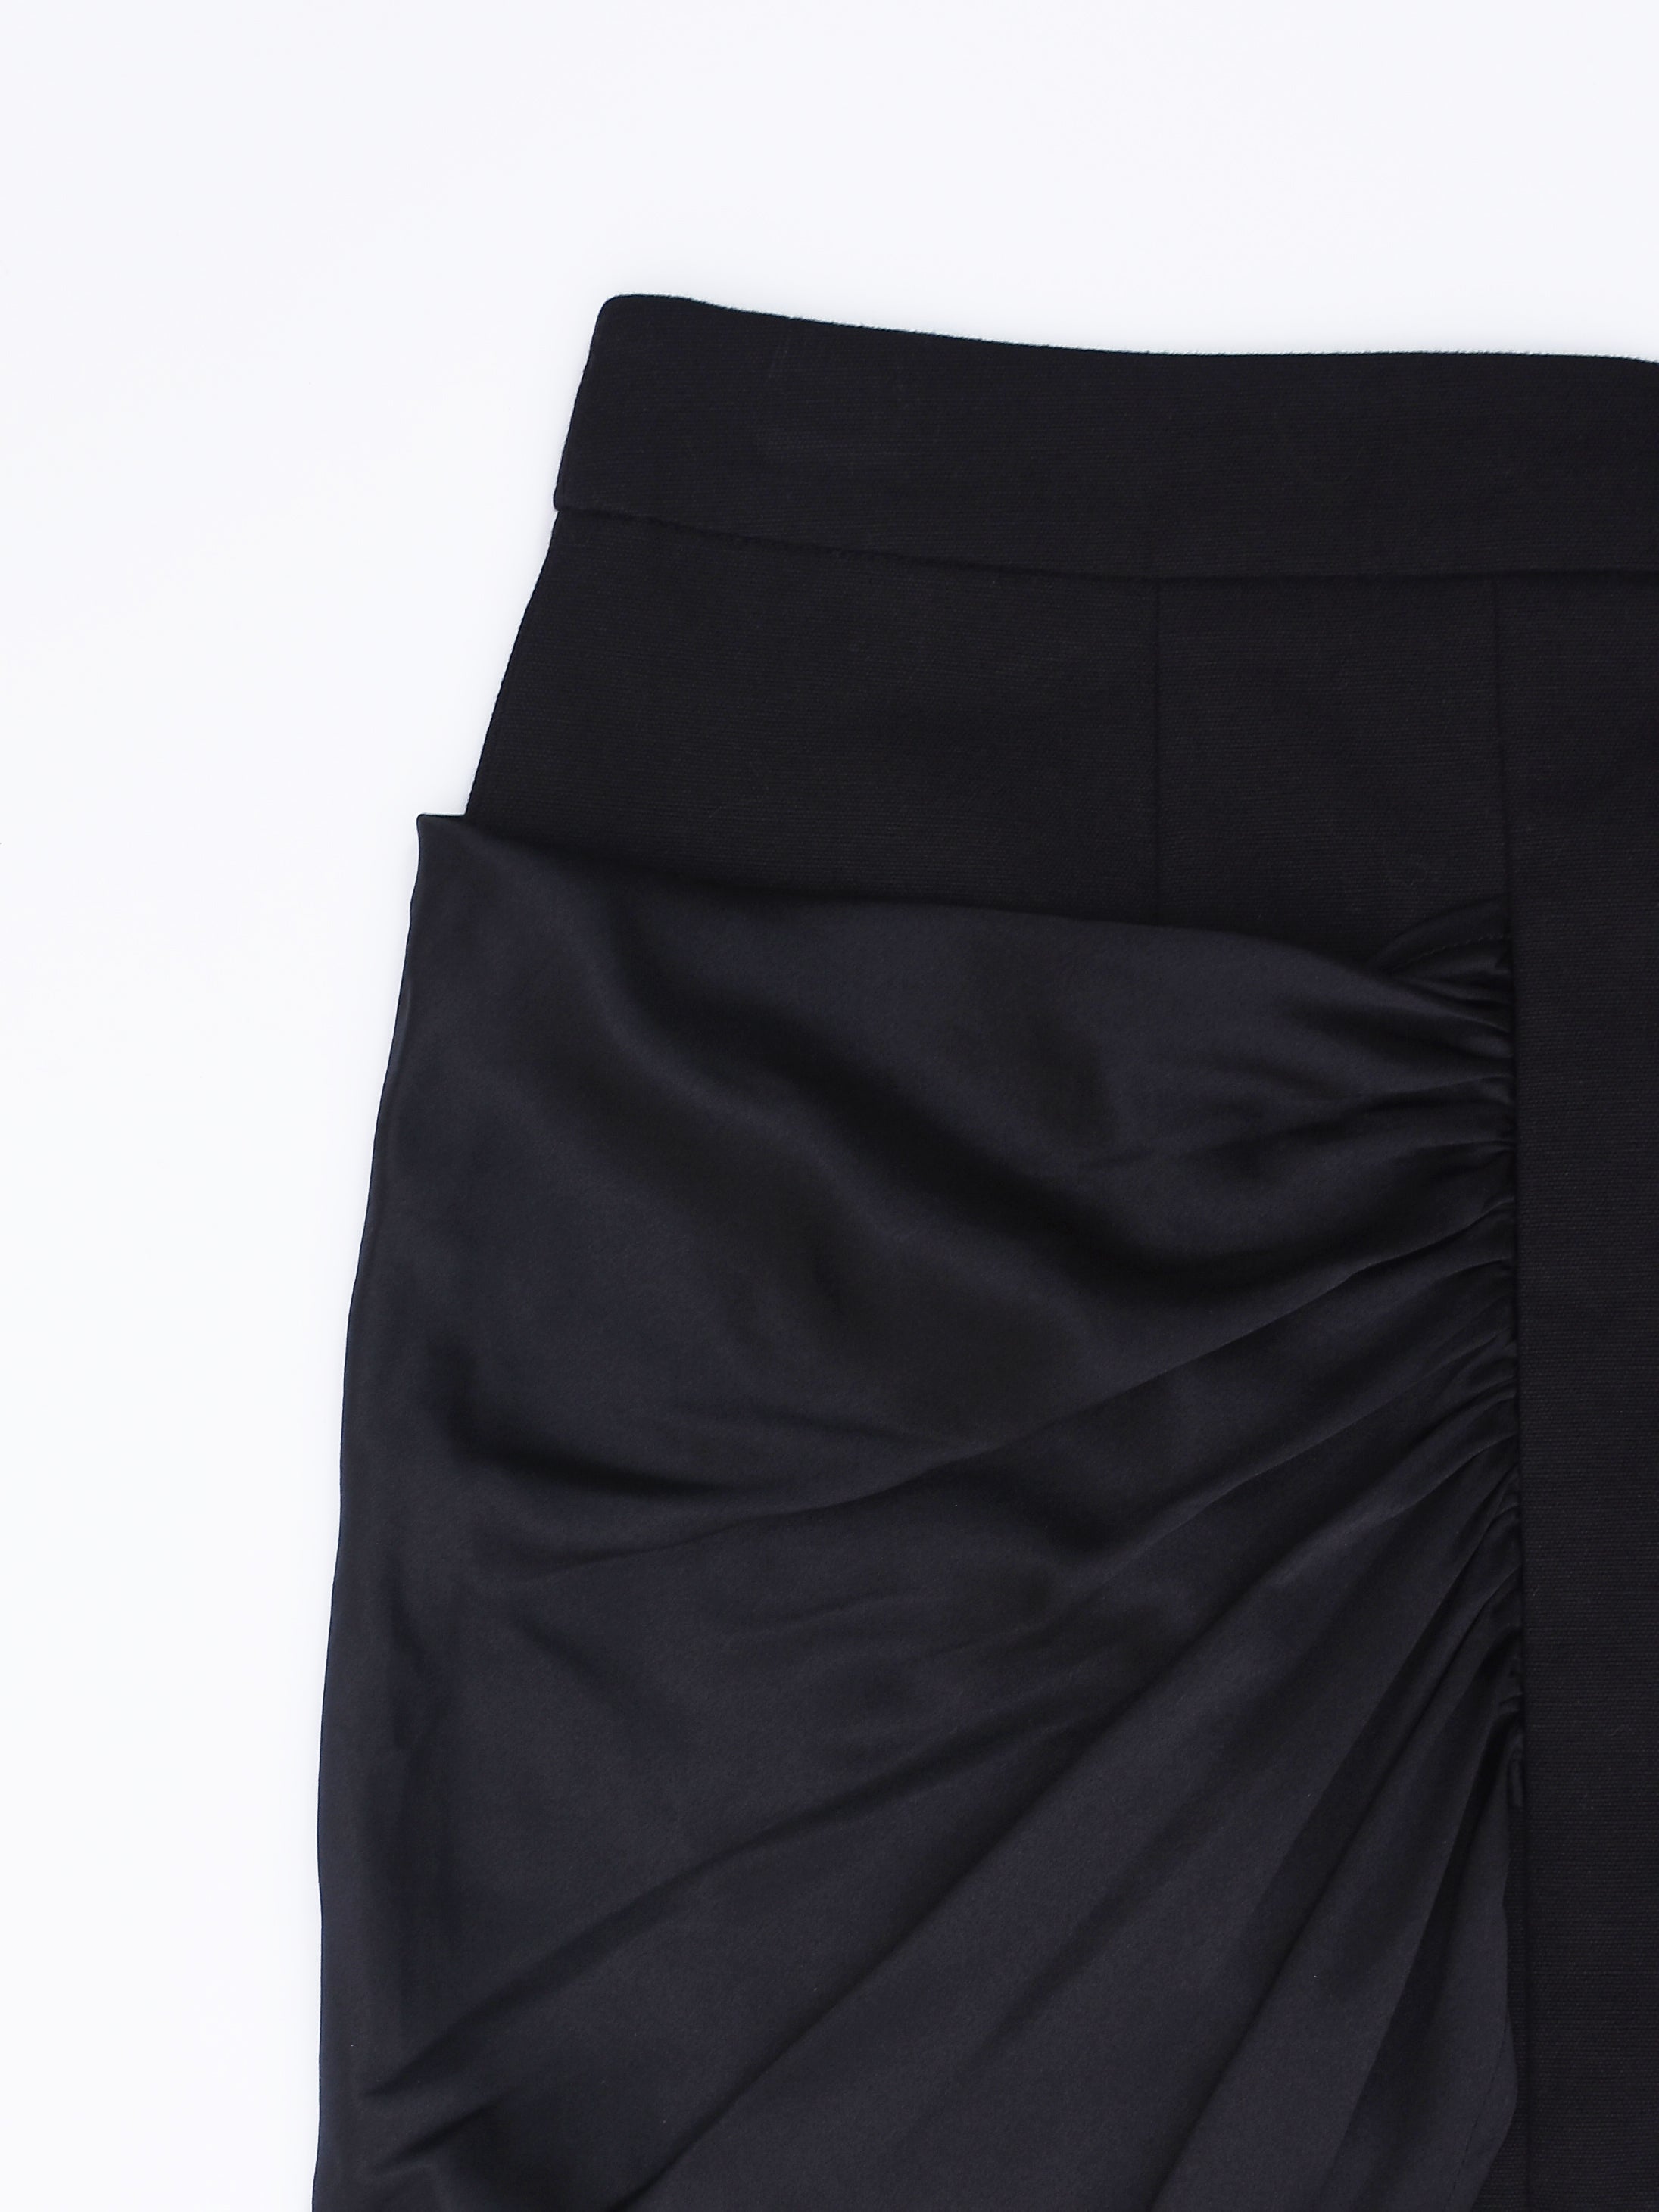 BLACK PENCIL SKIRT WITH SILK DETAILING